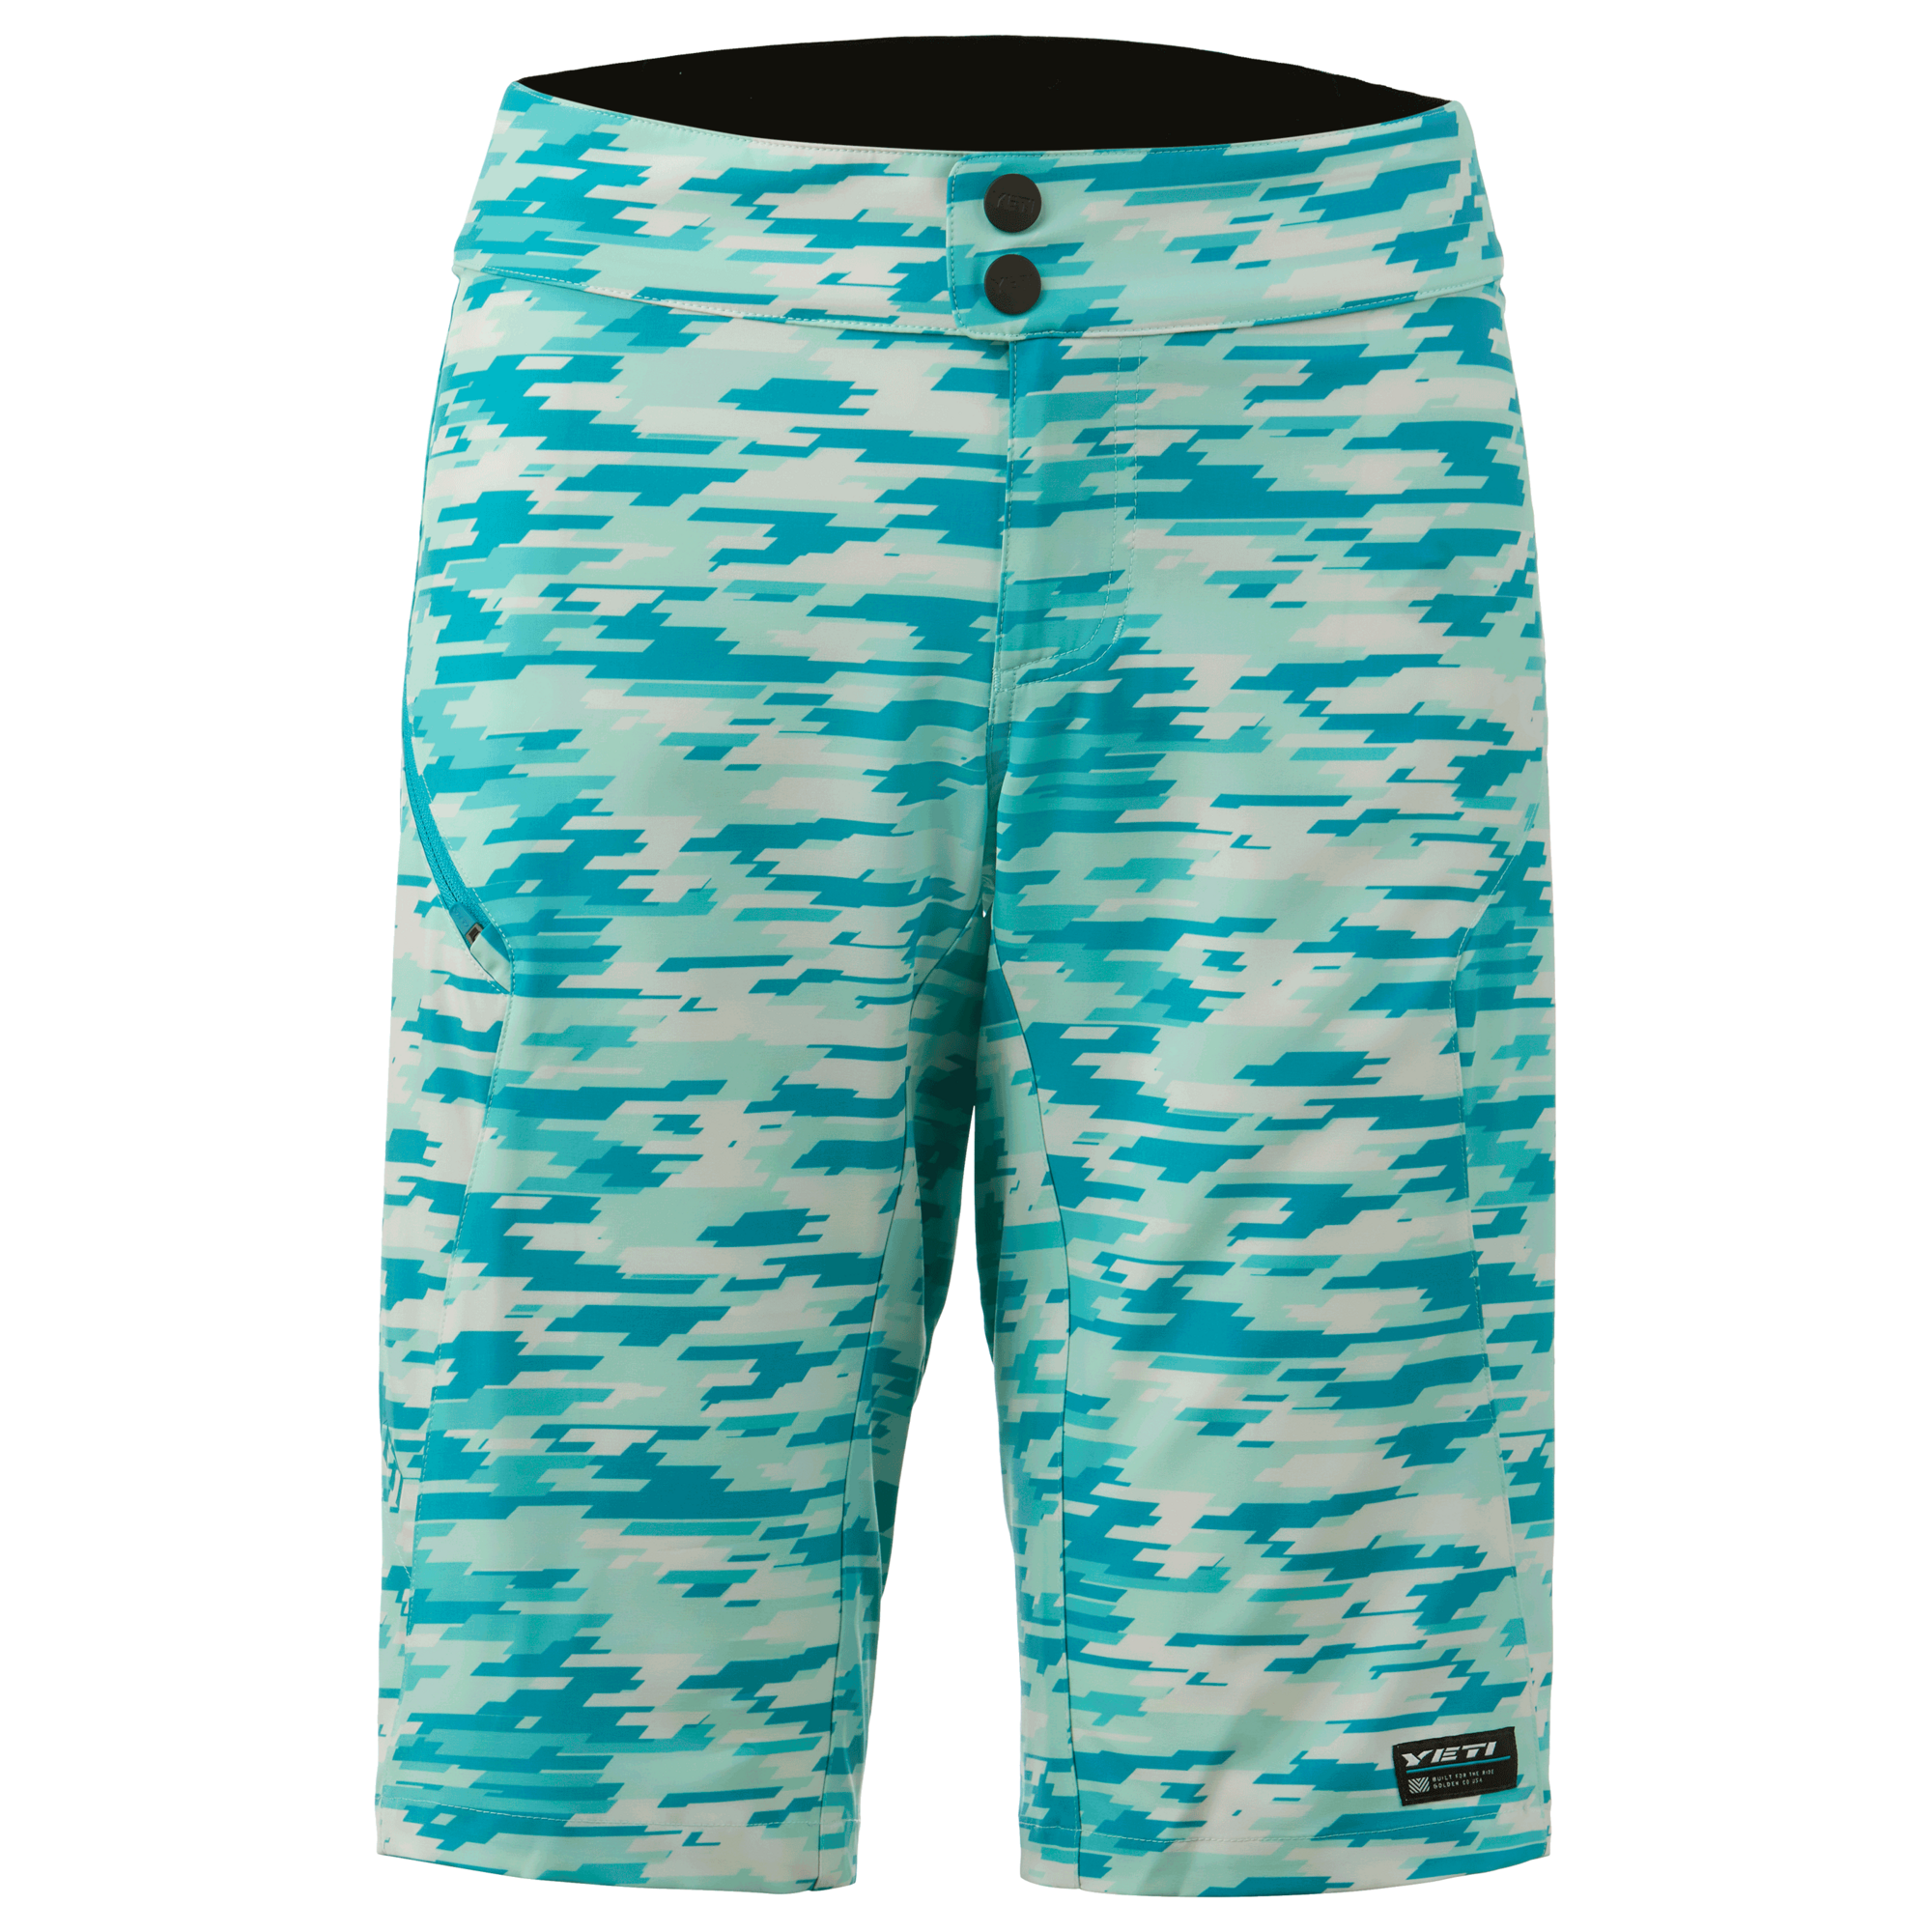 https://www.sefiles.net/images/library/zoom/yeti-cycles-women's-dawson-short--455374-3355529-2.png